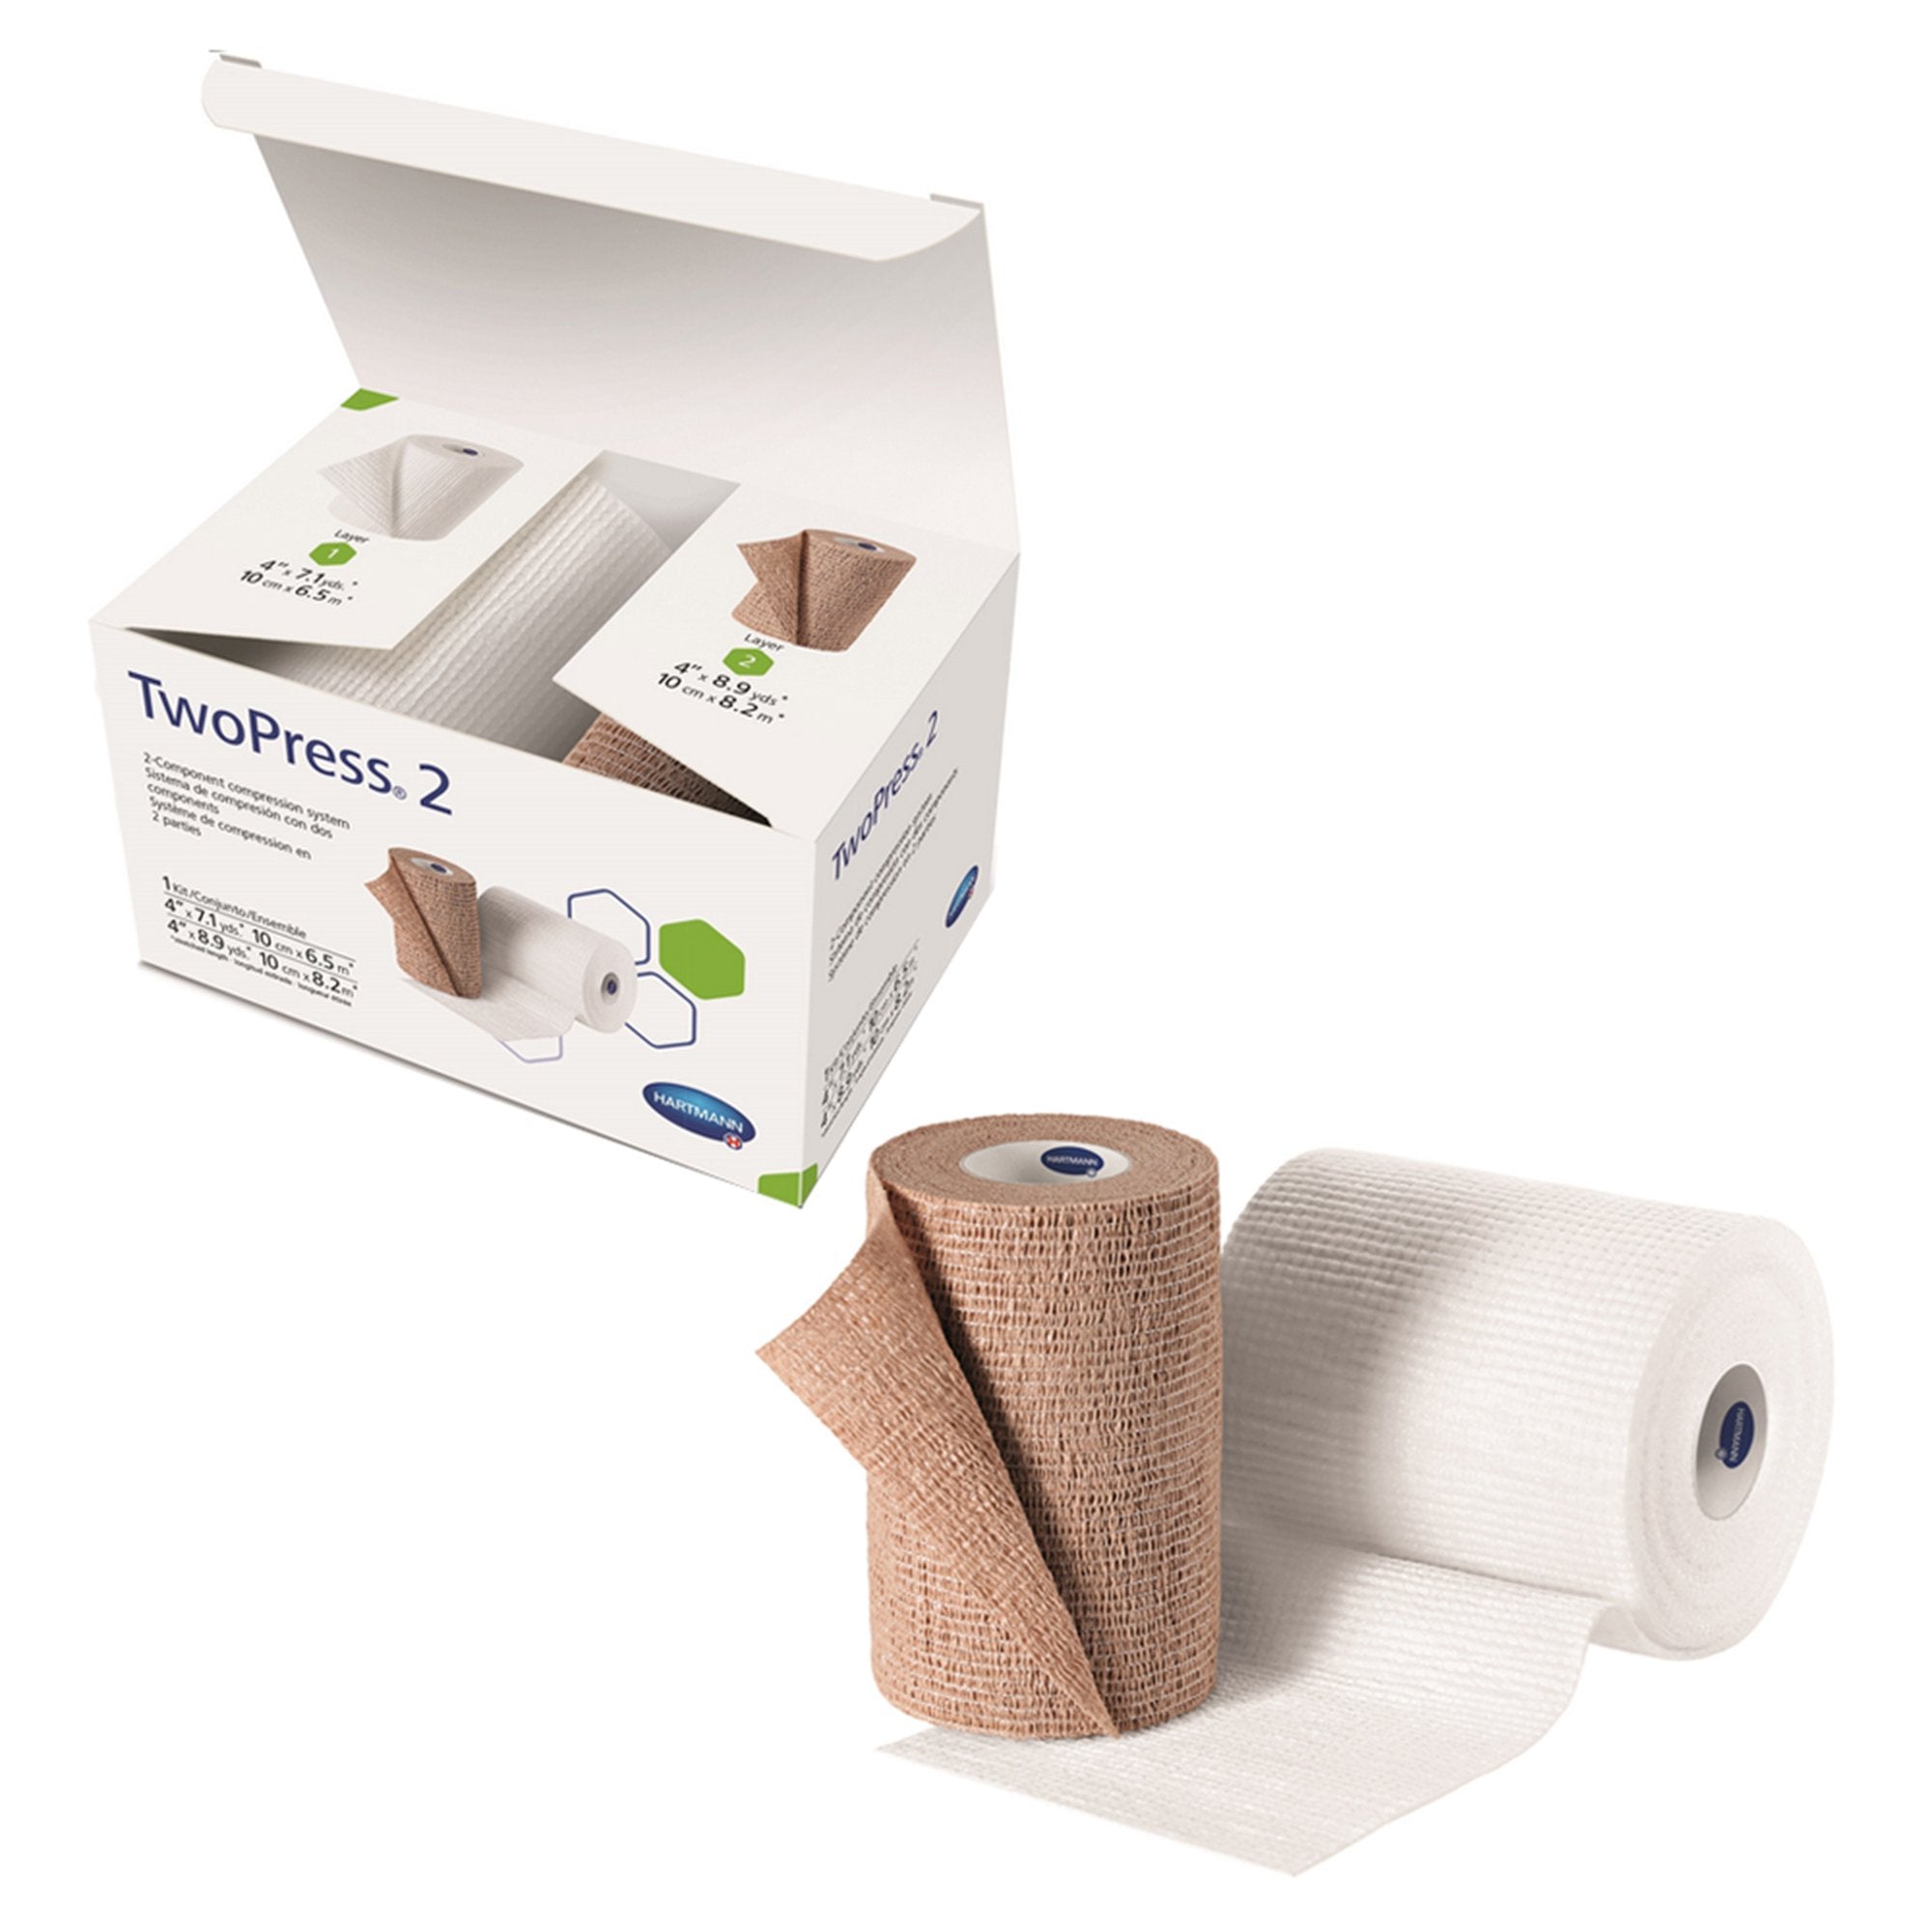 2 Layer Compression Bandage System TwoPress 2 4 Inch X 7 Yard / 4 Inch X 8-9/10 Yard 40 mmHg Self-adherent Closure Tan / White NonSterile